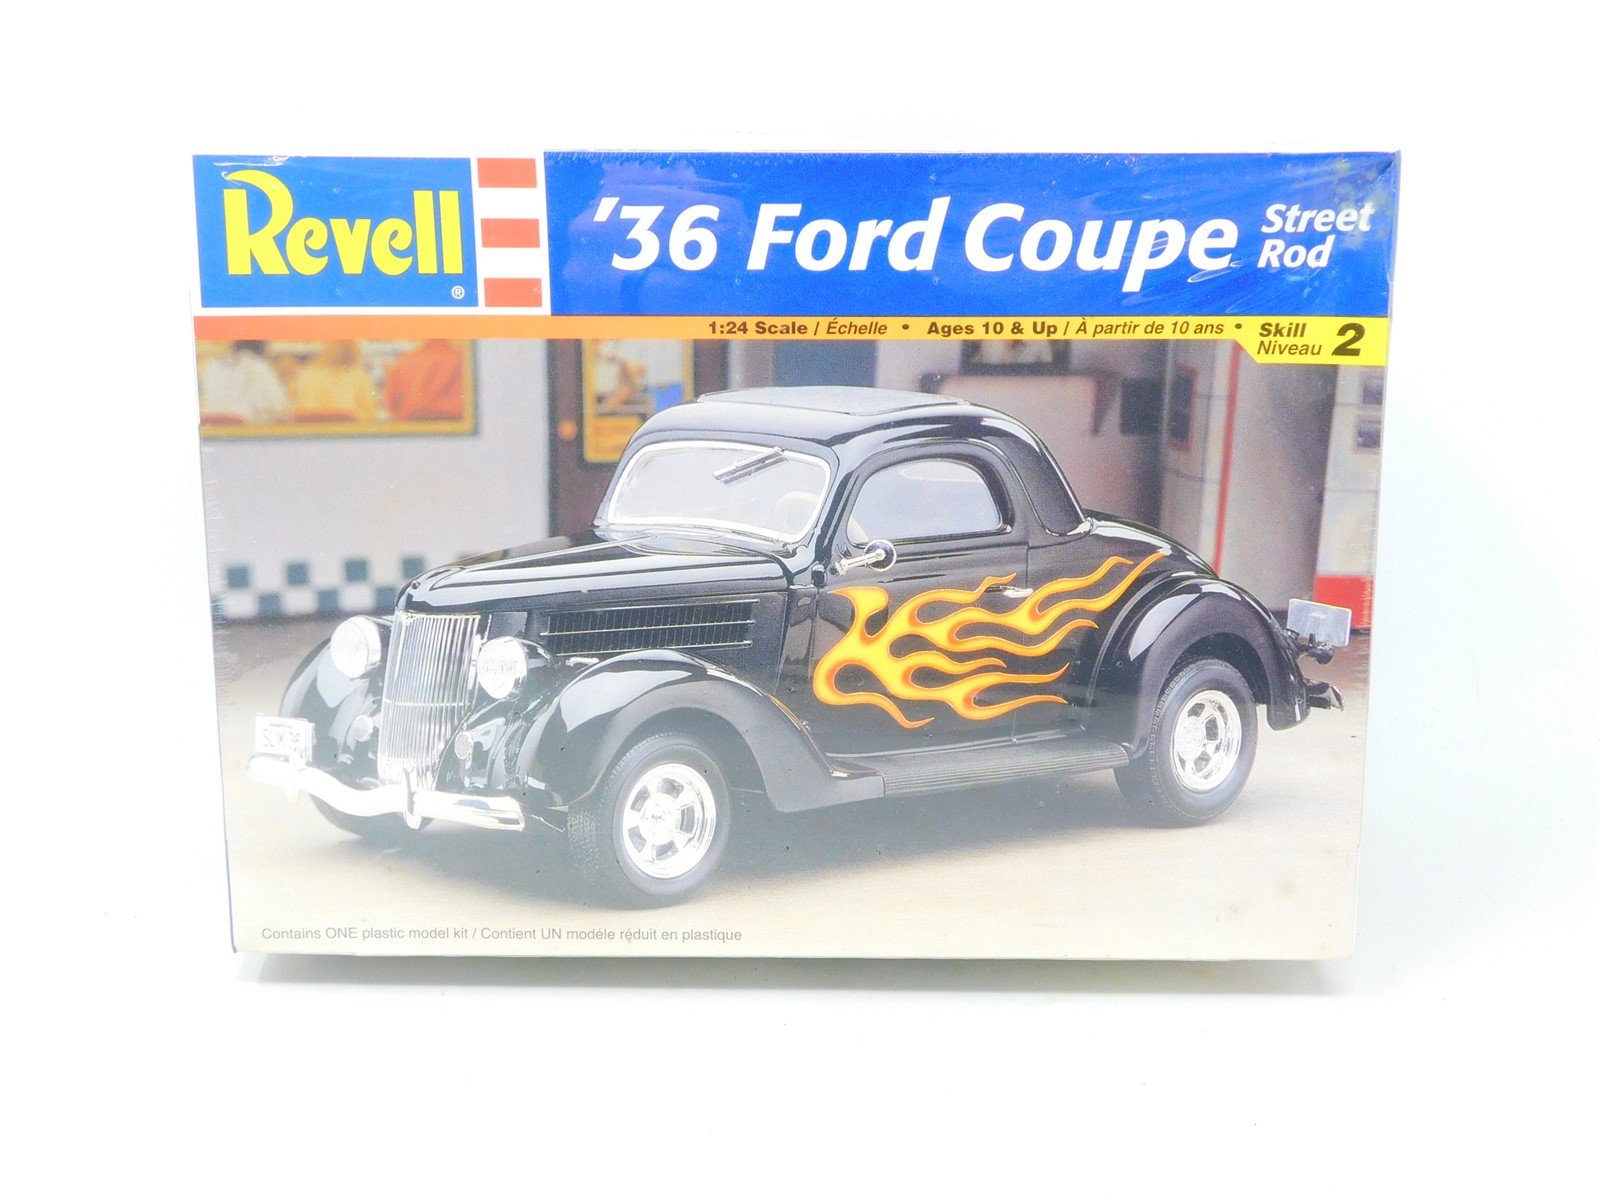 1:24 Scale Revell Model Car Kit #85-2595 '36 Ford Coupe Street Rod - SEALED